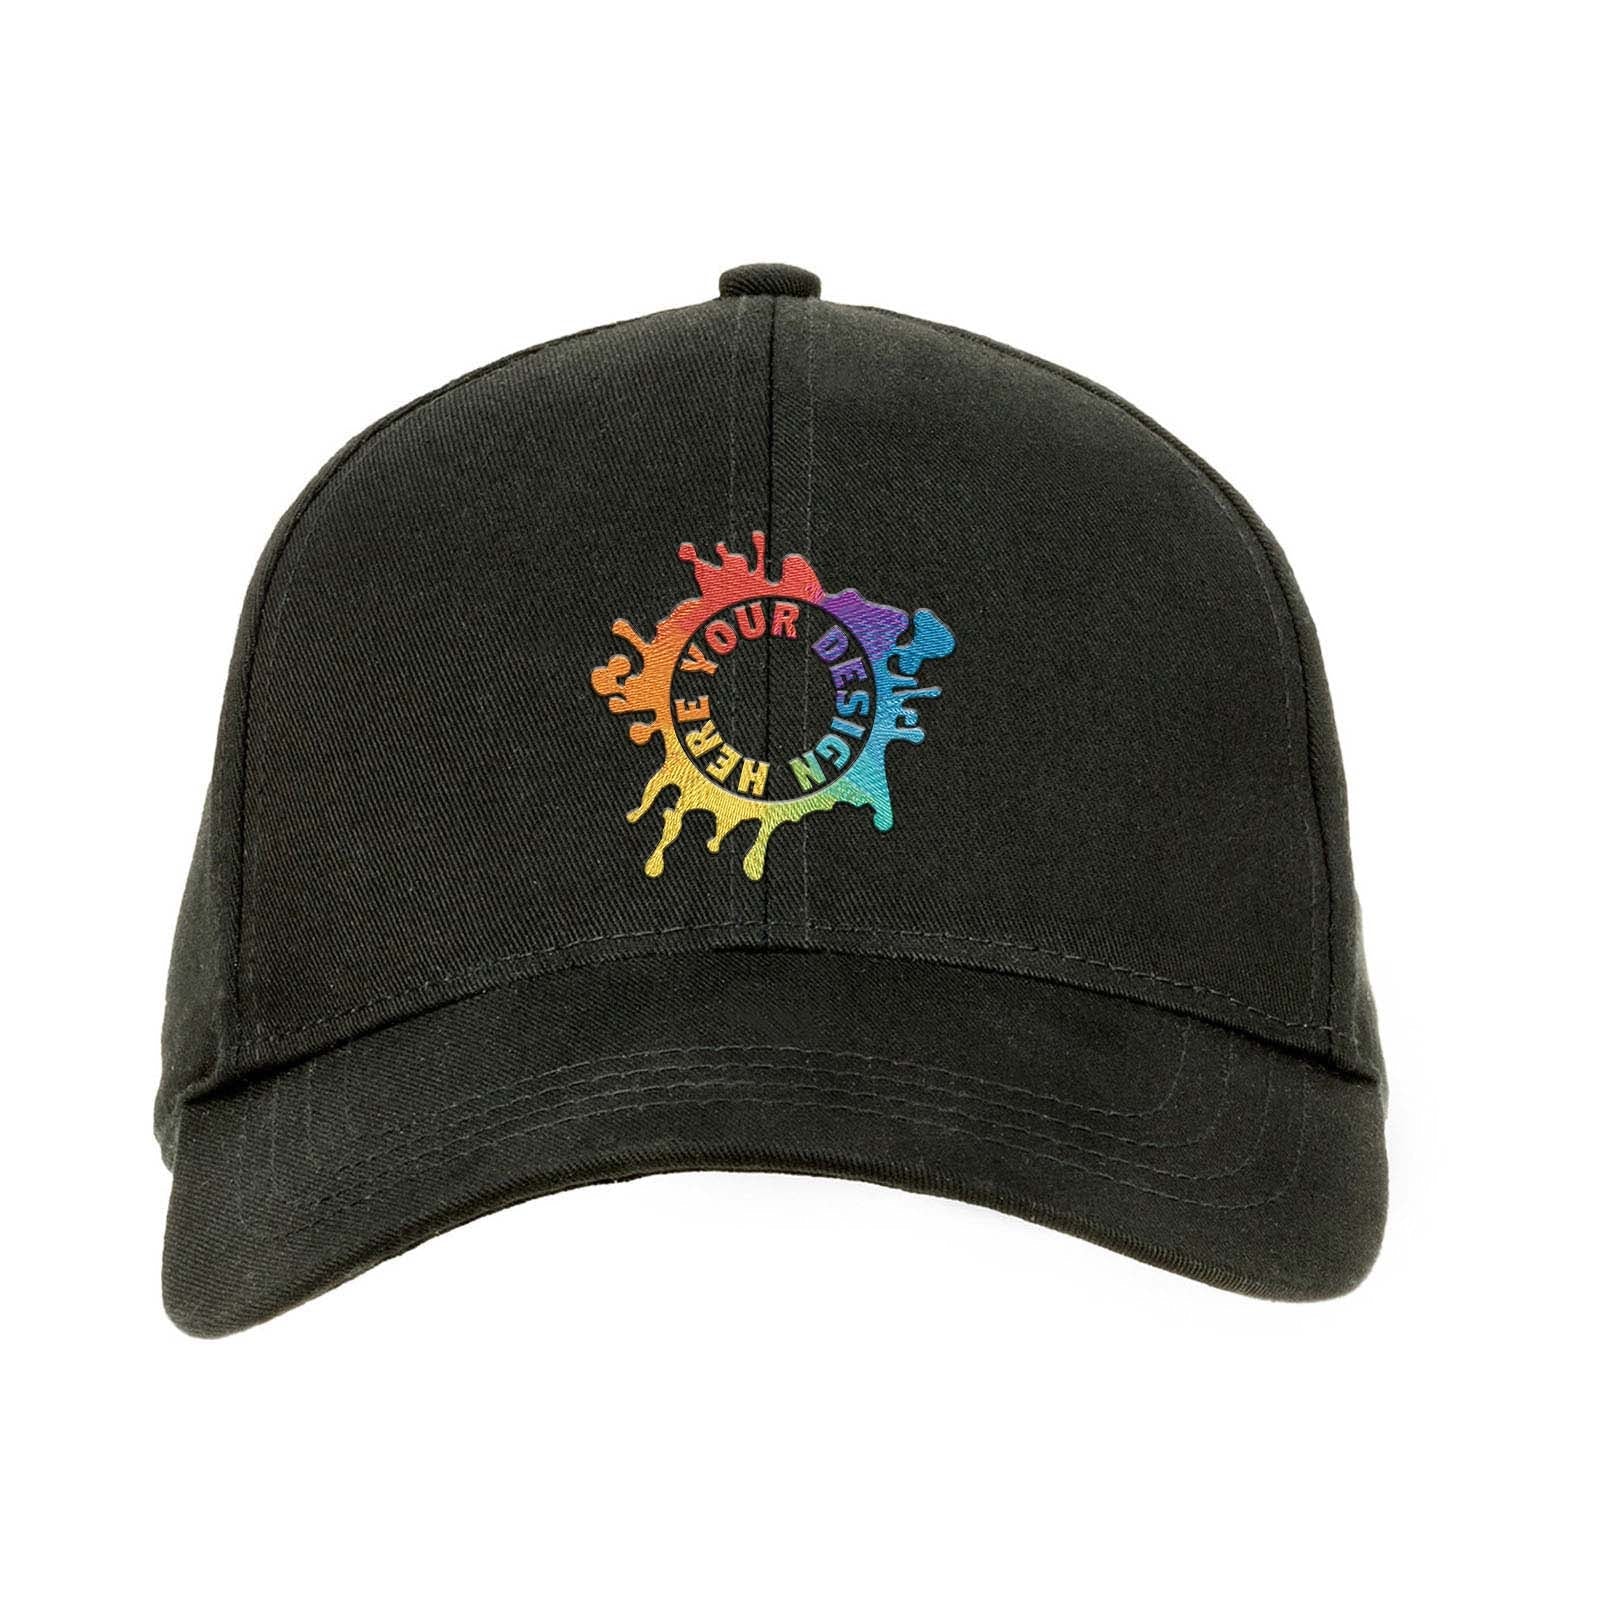 Embroidered econscious Structured Eco Baseball Cap - Mato & Hash